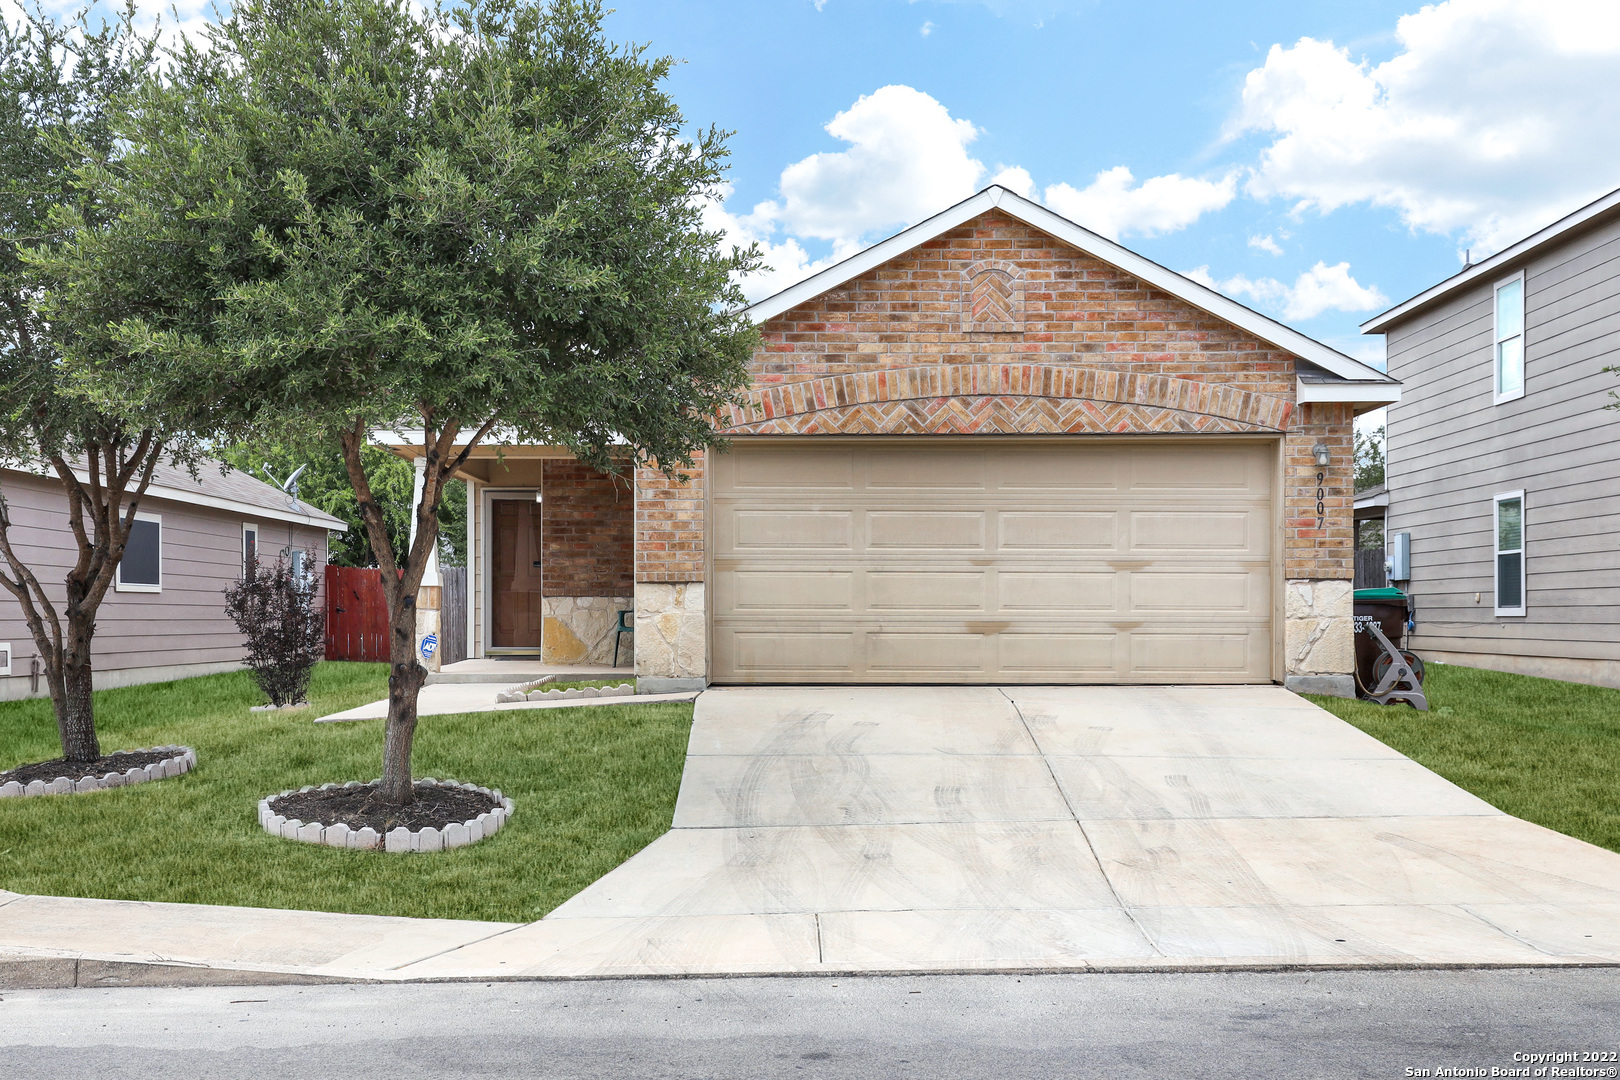 Welcome Home to this beautiful one story property located in popular far northwest side of San Antonio feeding into the brand new NISD High School, Sotomayor! It is also within walking distance to the local elementary school. This 3 bed 2 full bath is the perfect starter home or for someone who would like to downsize. The backyard has a covered patio and a shed with electrical power for a workshop. Grab your Realtor and come see this property!